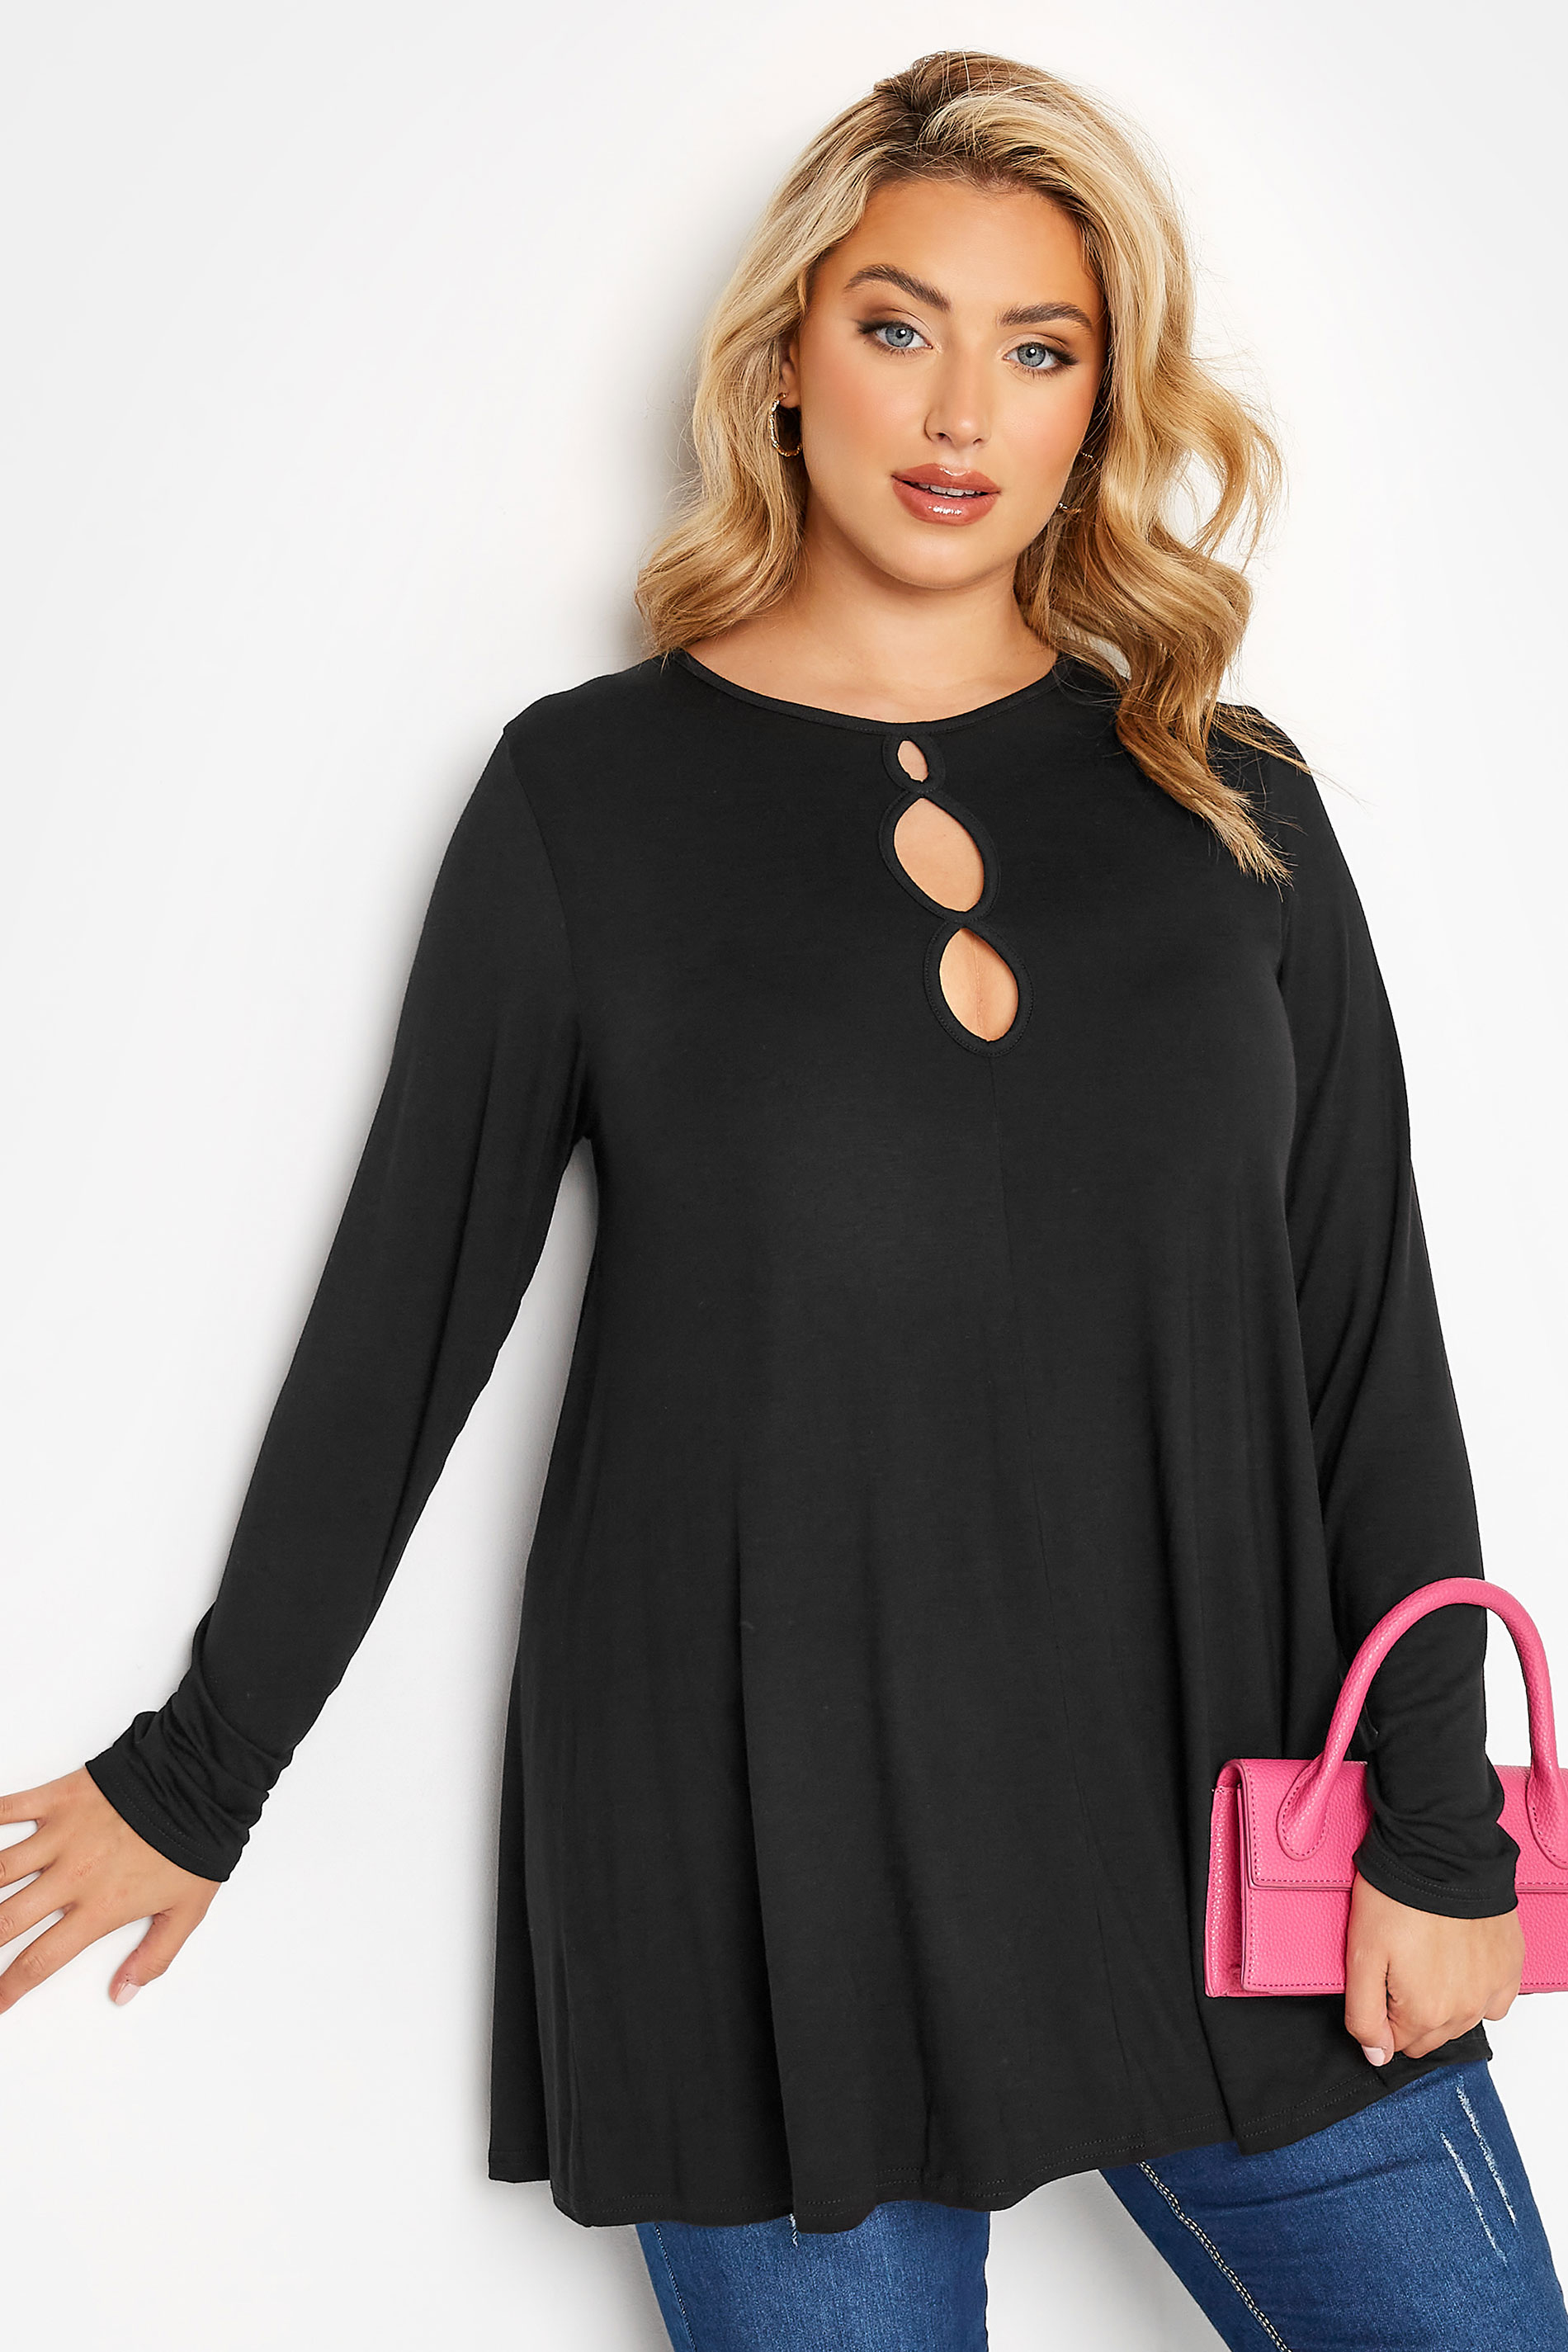 LIMITED COLLECTION Curve Black Cut Out Neckline Swing Top 1